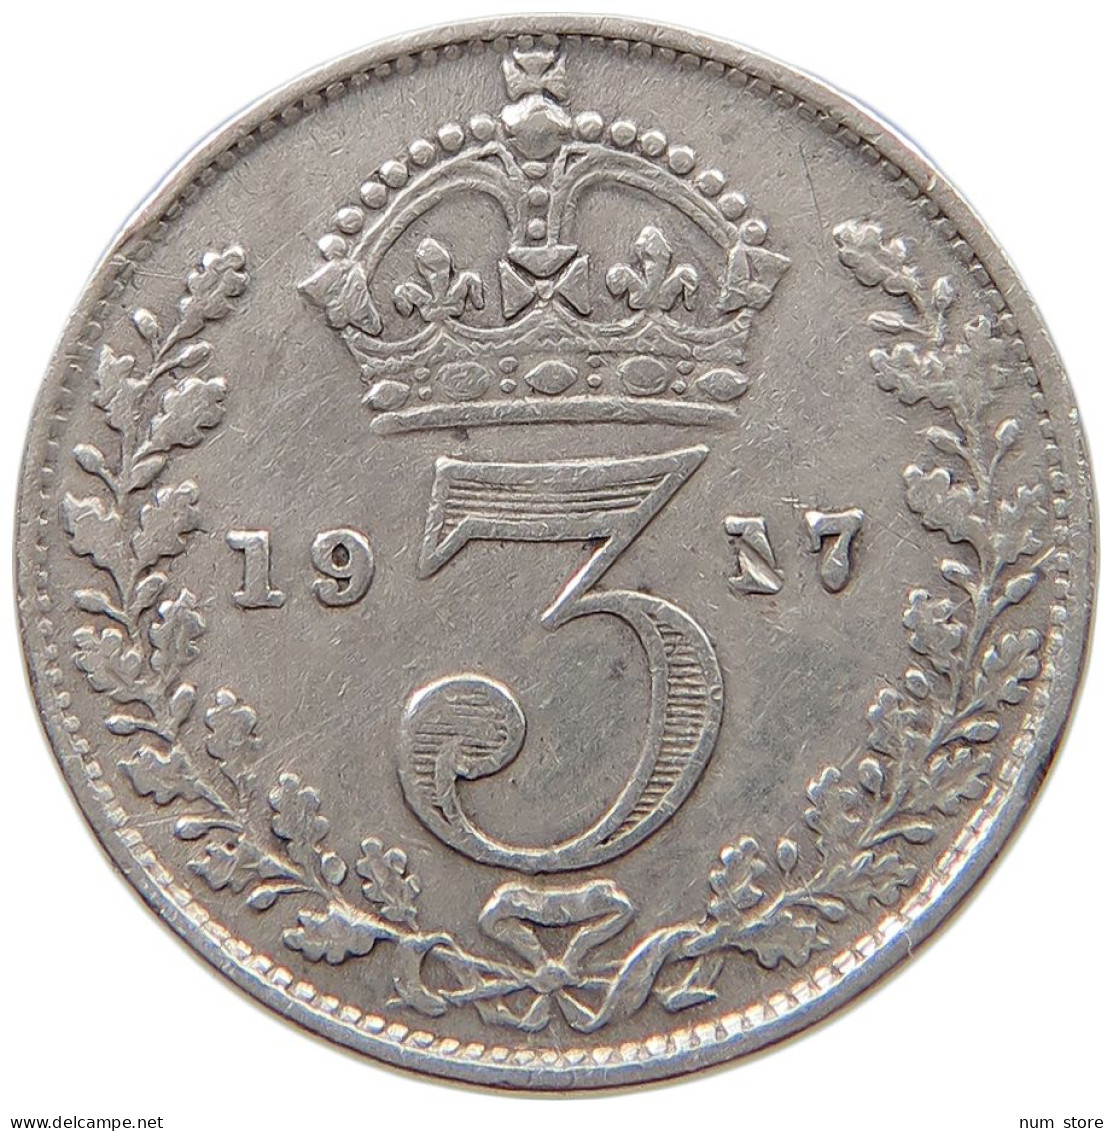 GREAT BRITAIN THREEPENCE 1917 #a004 0353 - F. 3 Pence